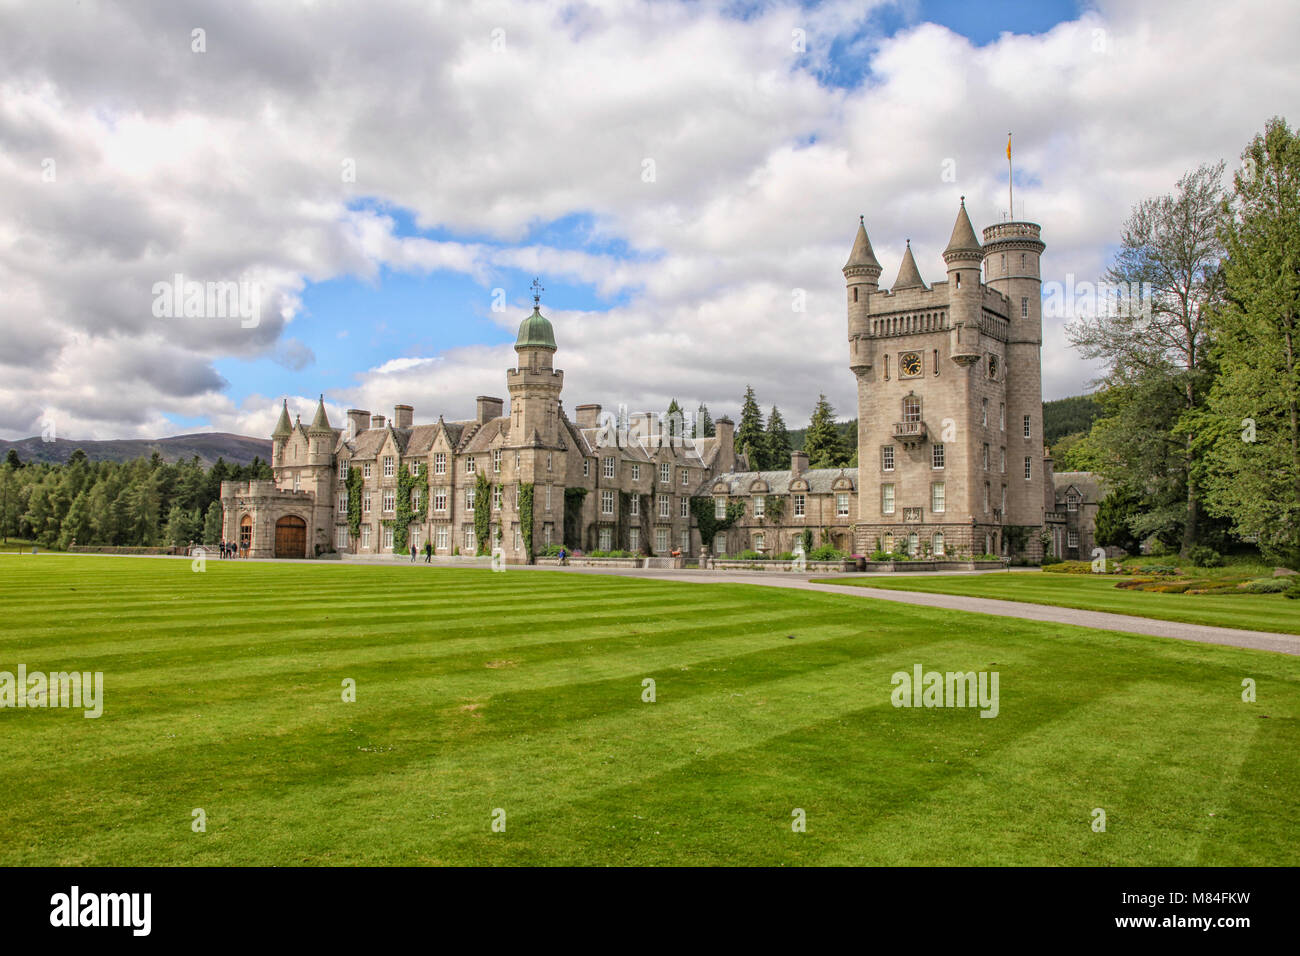 Balmoral castle in Scotland, holiday home of British royalty Stock Photo